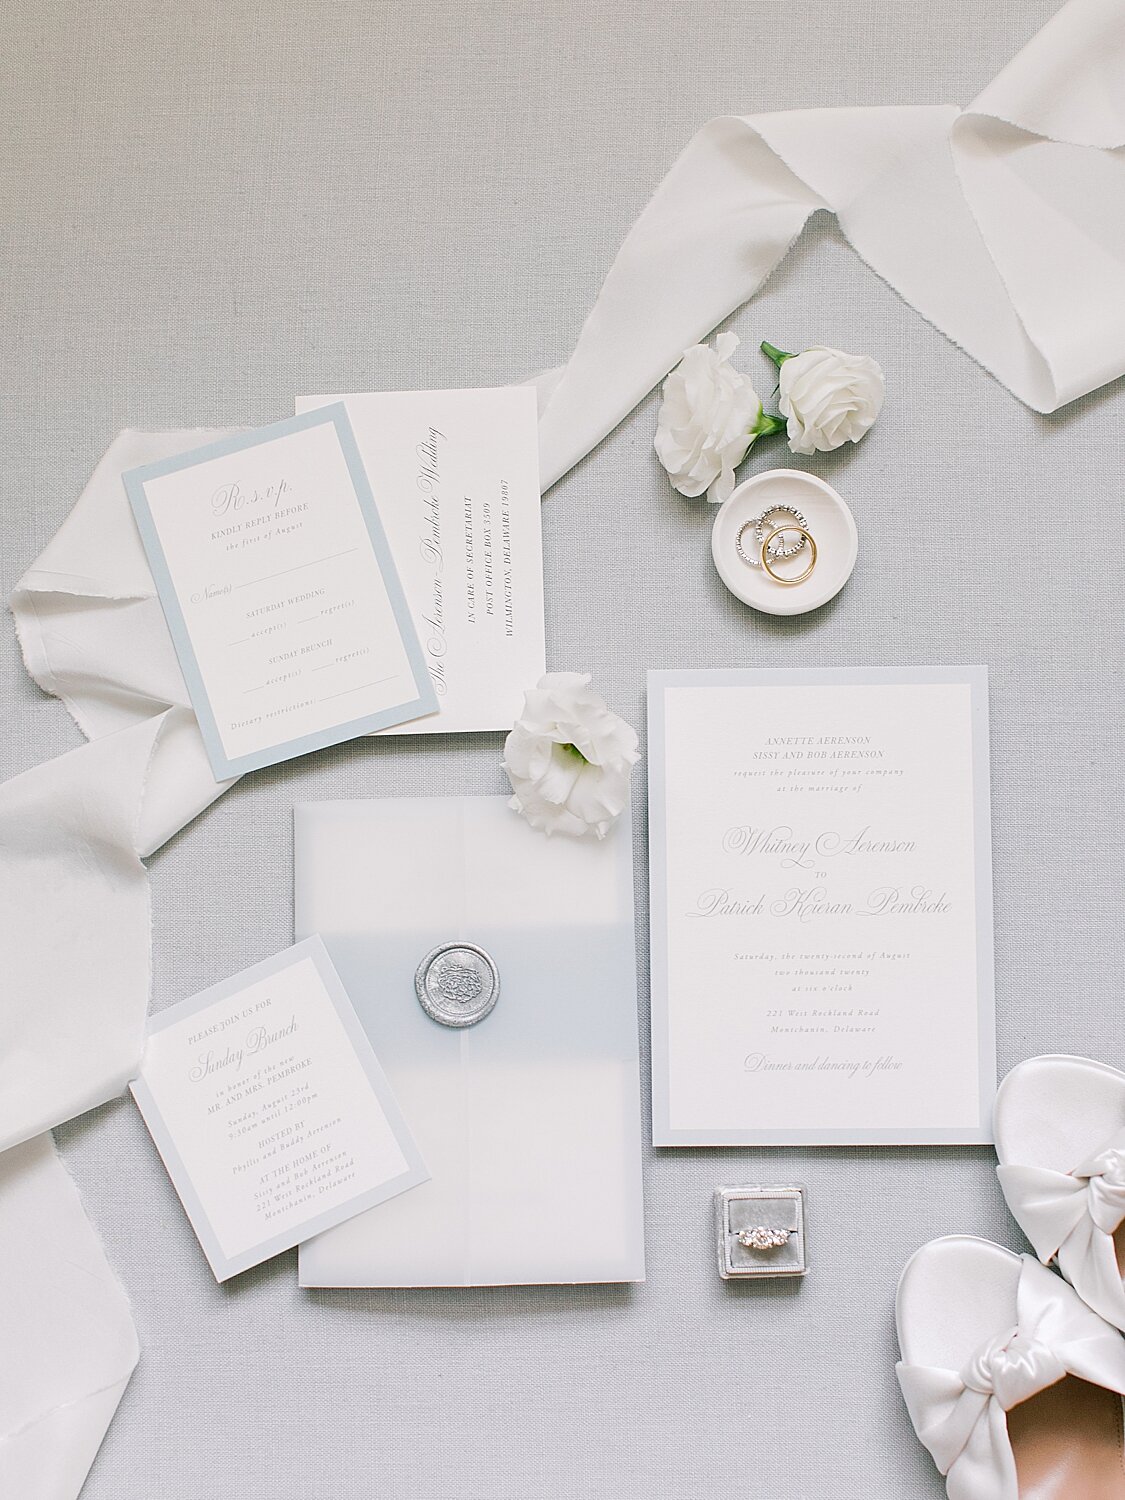 classic invitation suite for stylish private wedding | Stylish Private Home Wedding Inspiration | Asher Gardner Photography